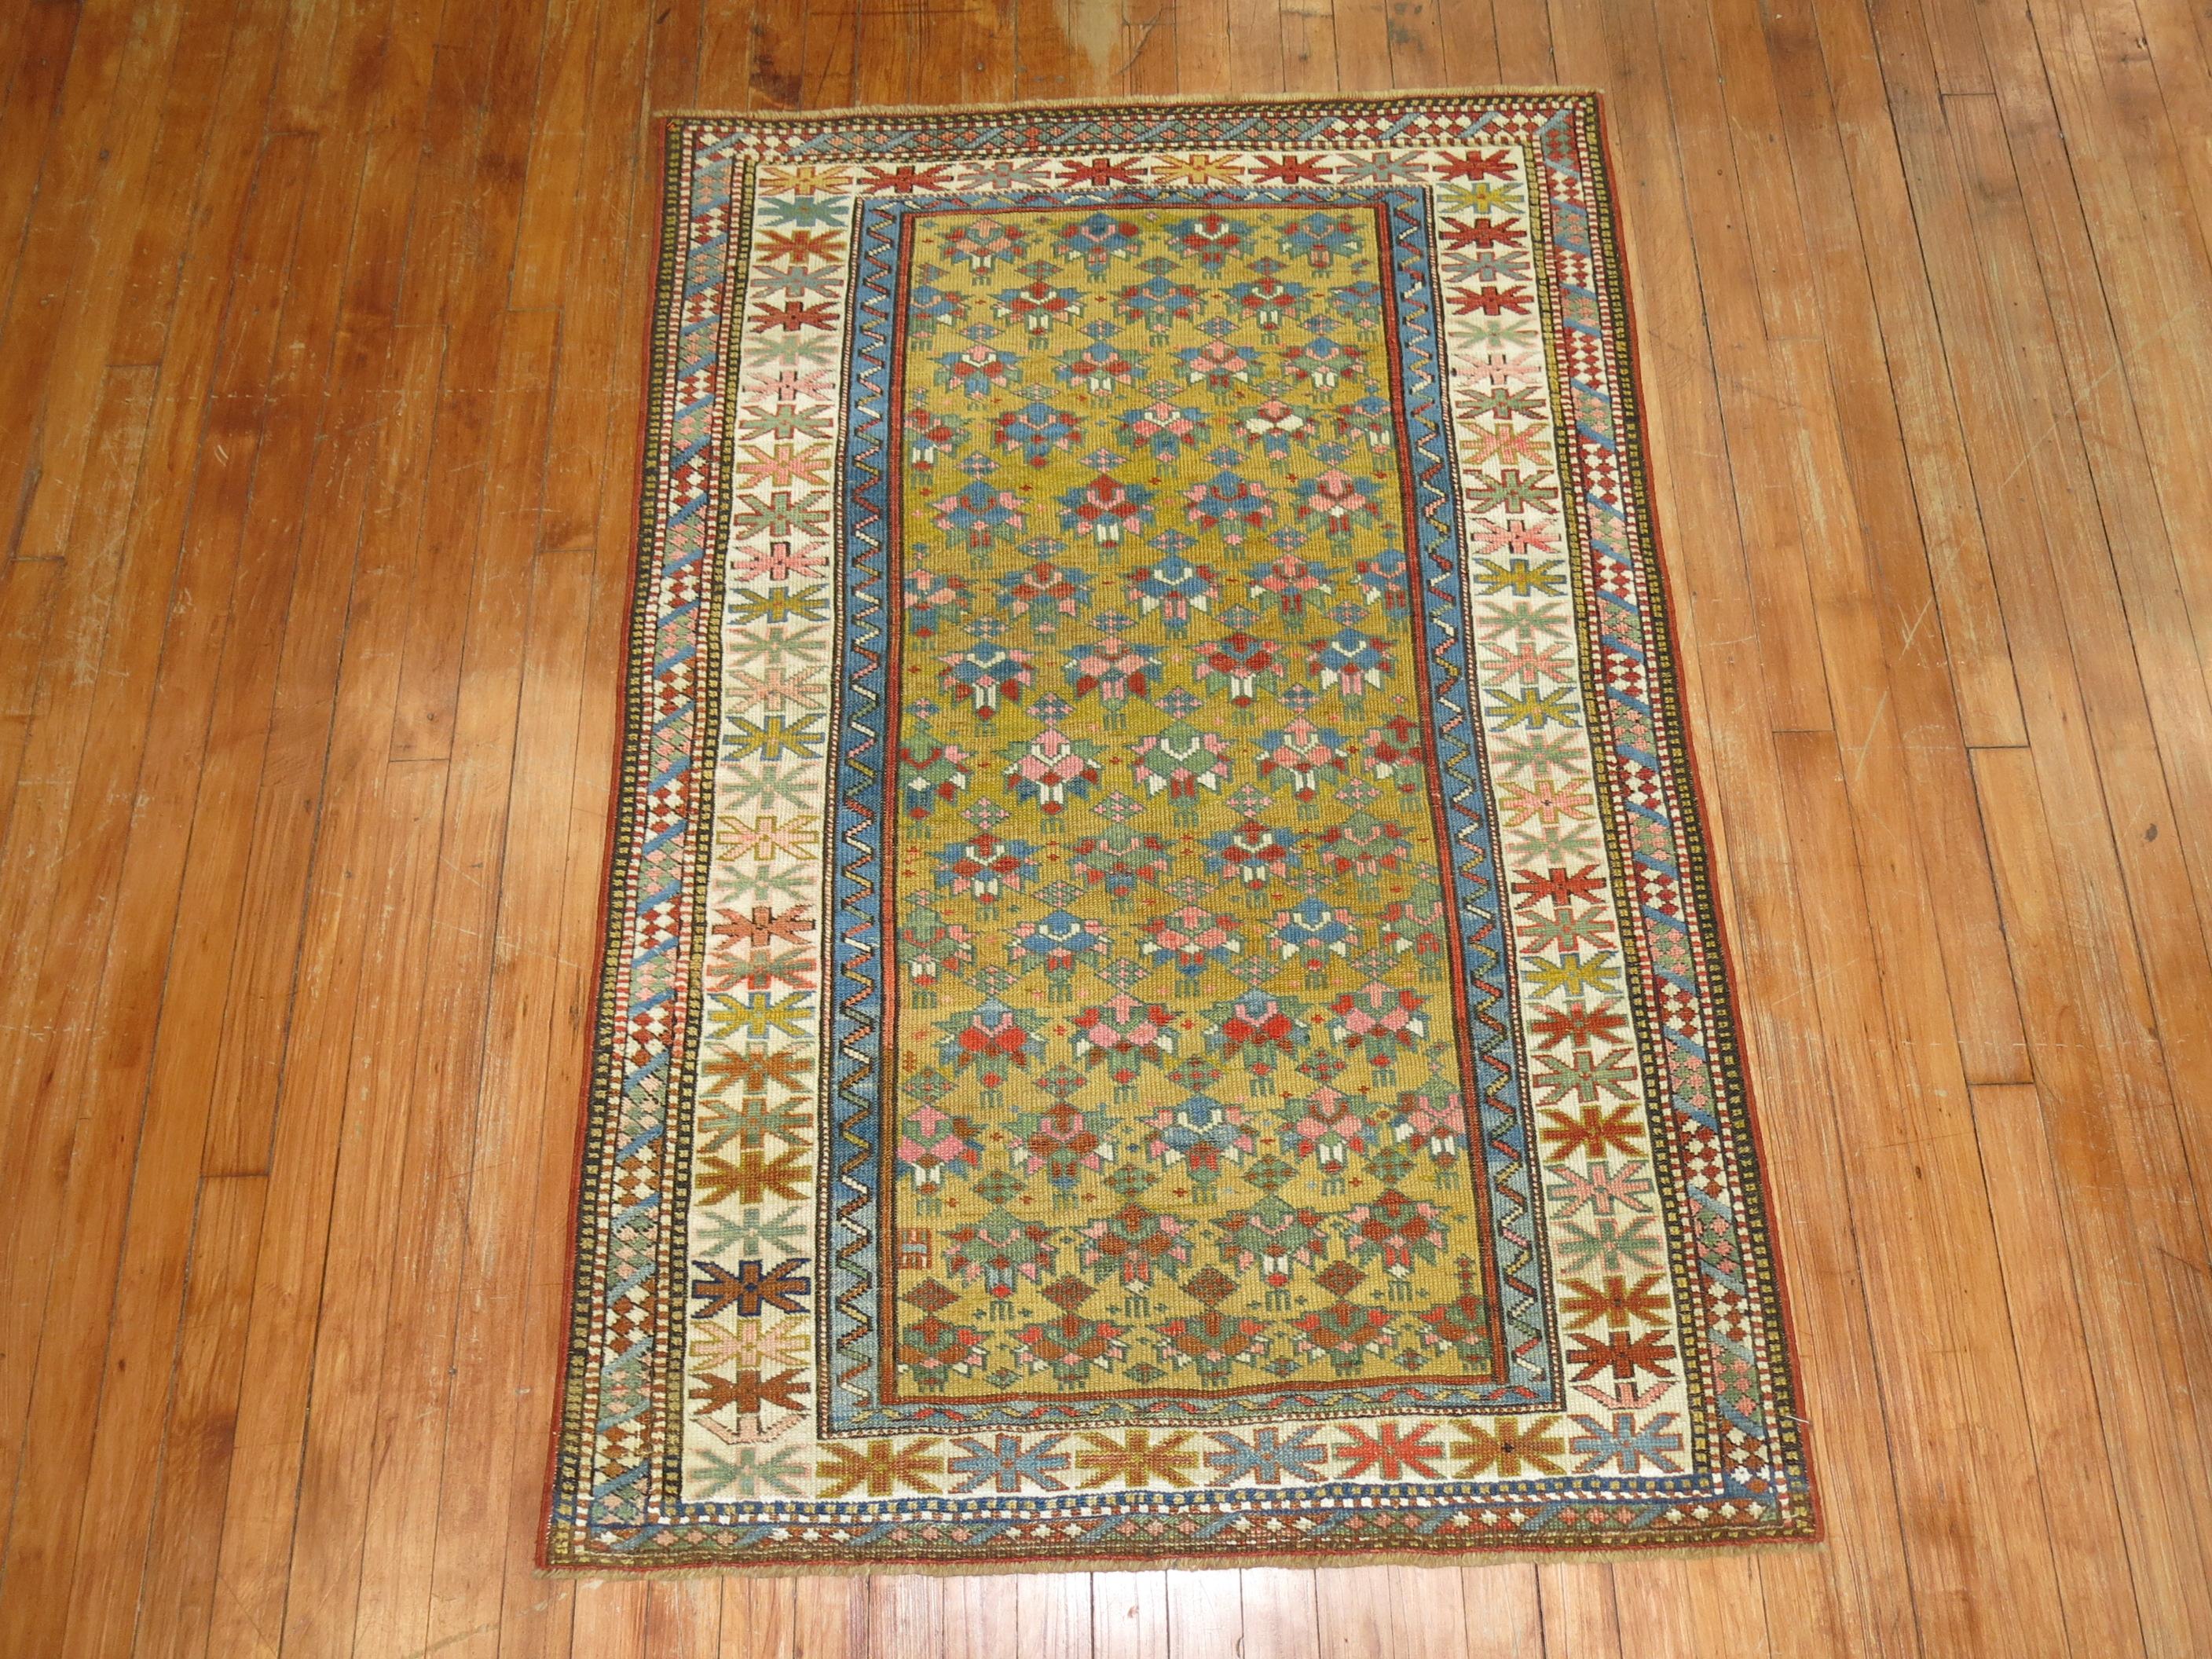 A geometric tribal looking Caucasian Shirvan rug from the late 19th century. Mustard ground, dominant accents in robin eggs blue and pink. The border is ivory

Measures: 3'3” x 4'9”

Antique Caucasian rugs from the Shirvan district village are